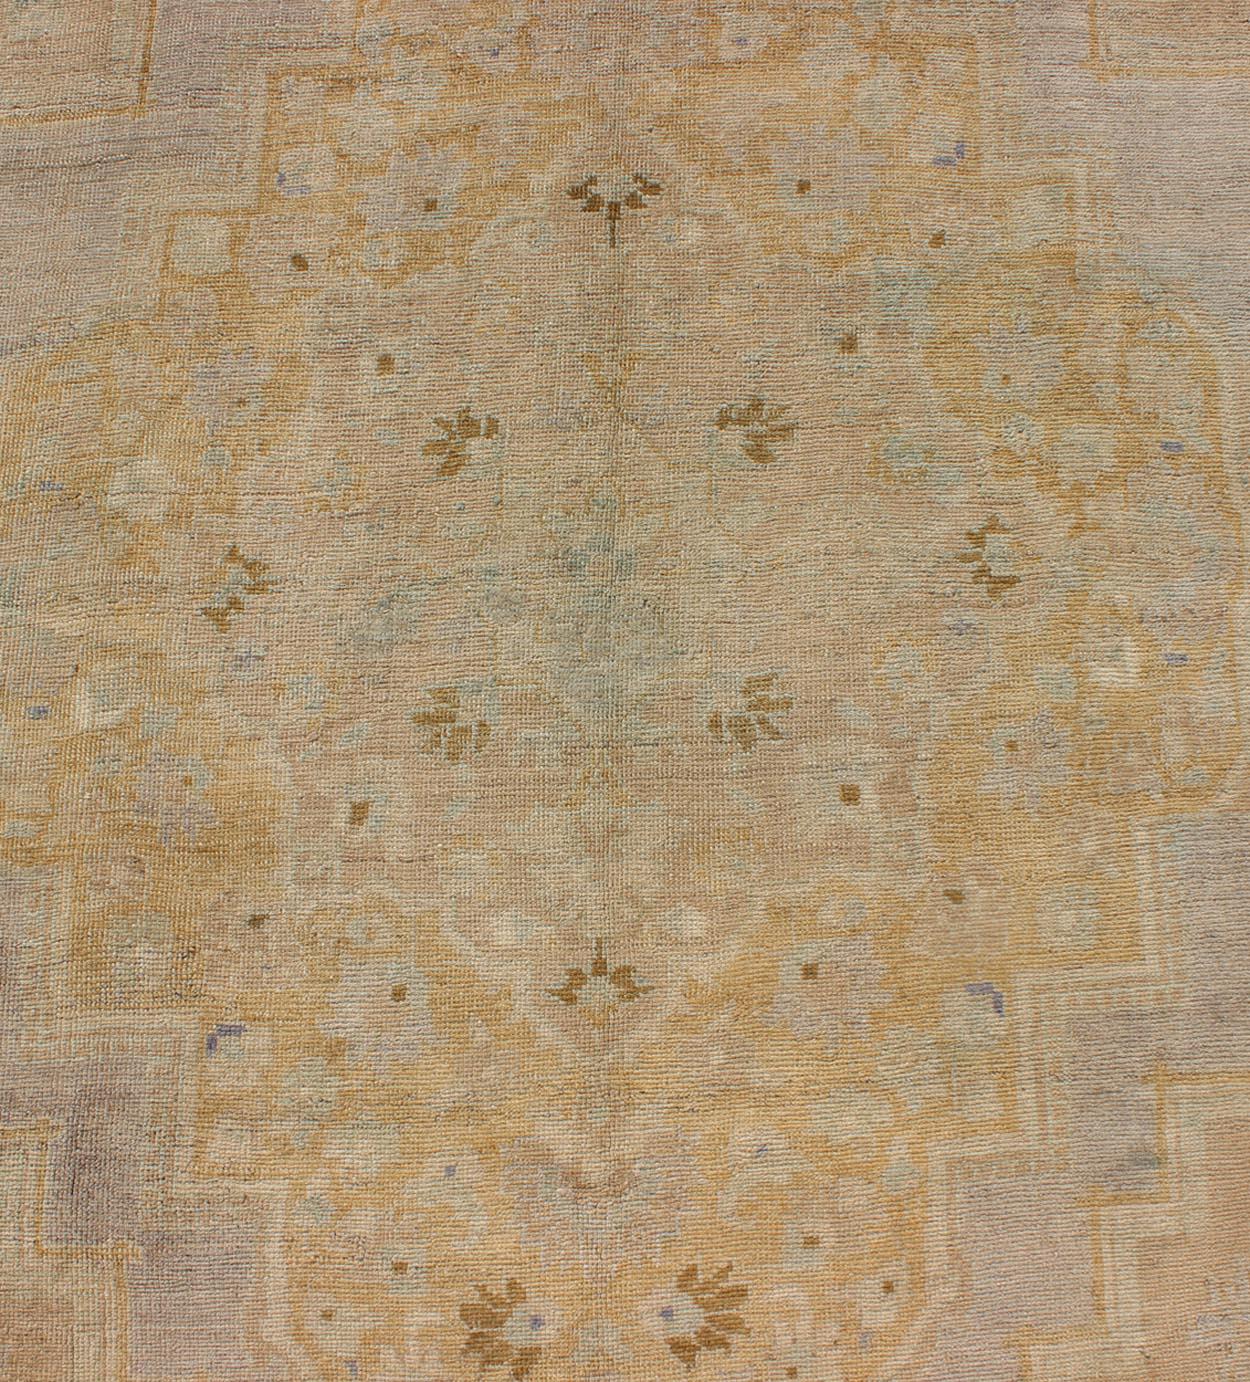 Mid-20th Century Vintage Turkish Oushak Rug with Lightly Toned Medallion Design For Sale